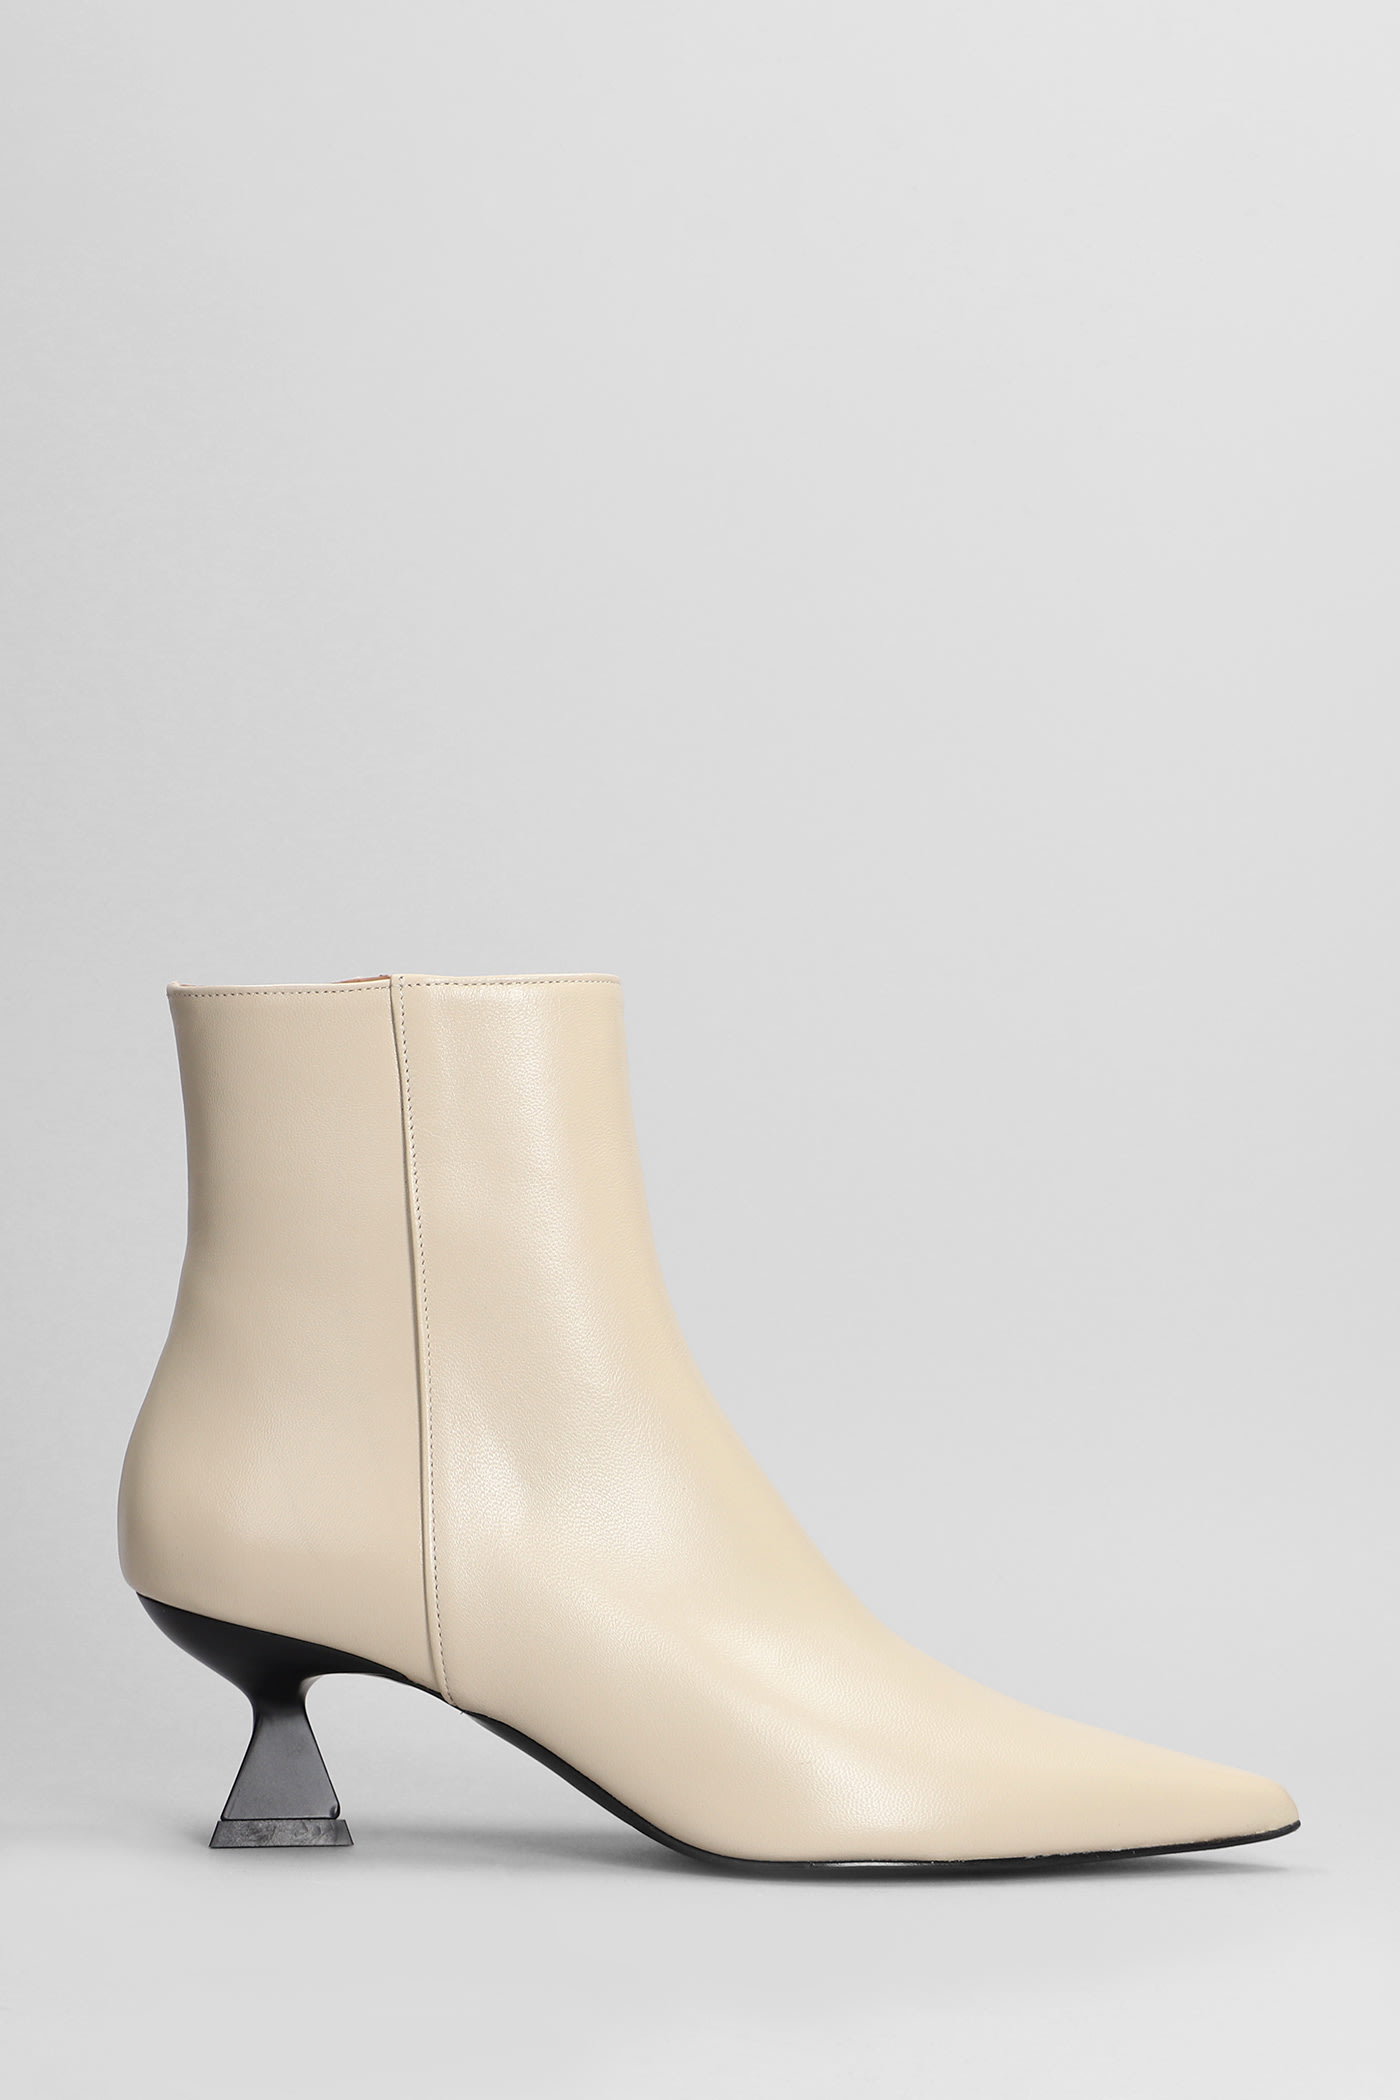 Jina High Heels Ankle Boots In Beige Leather